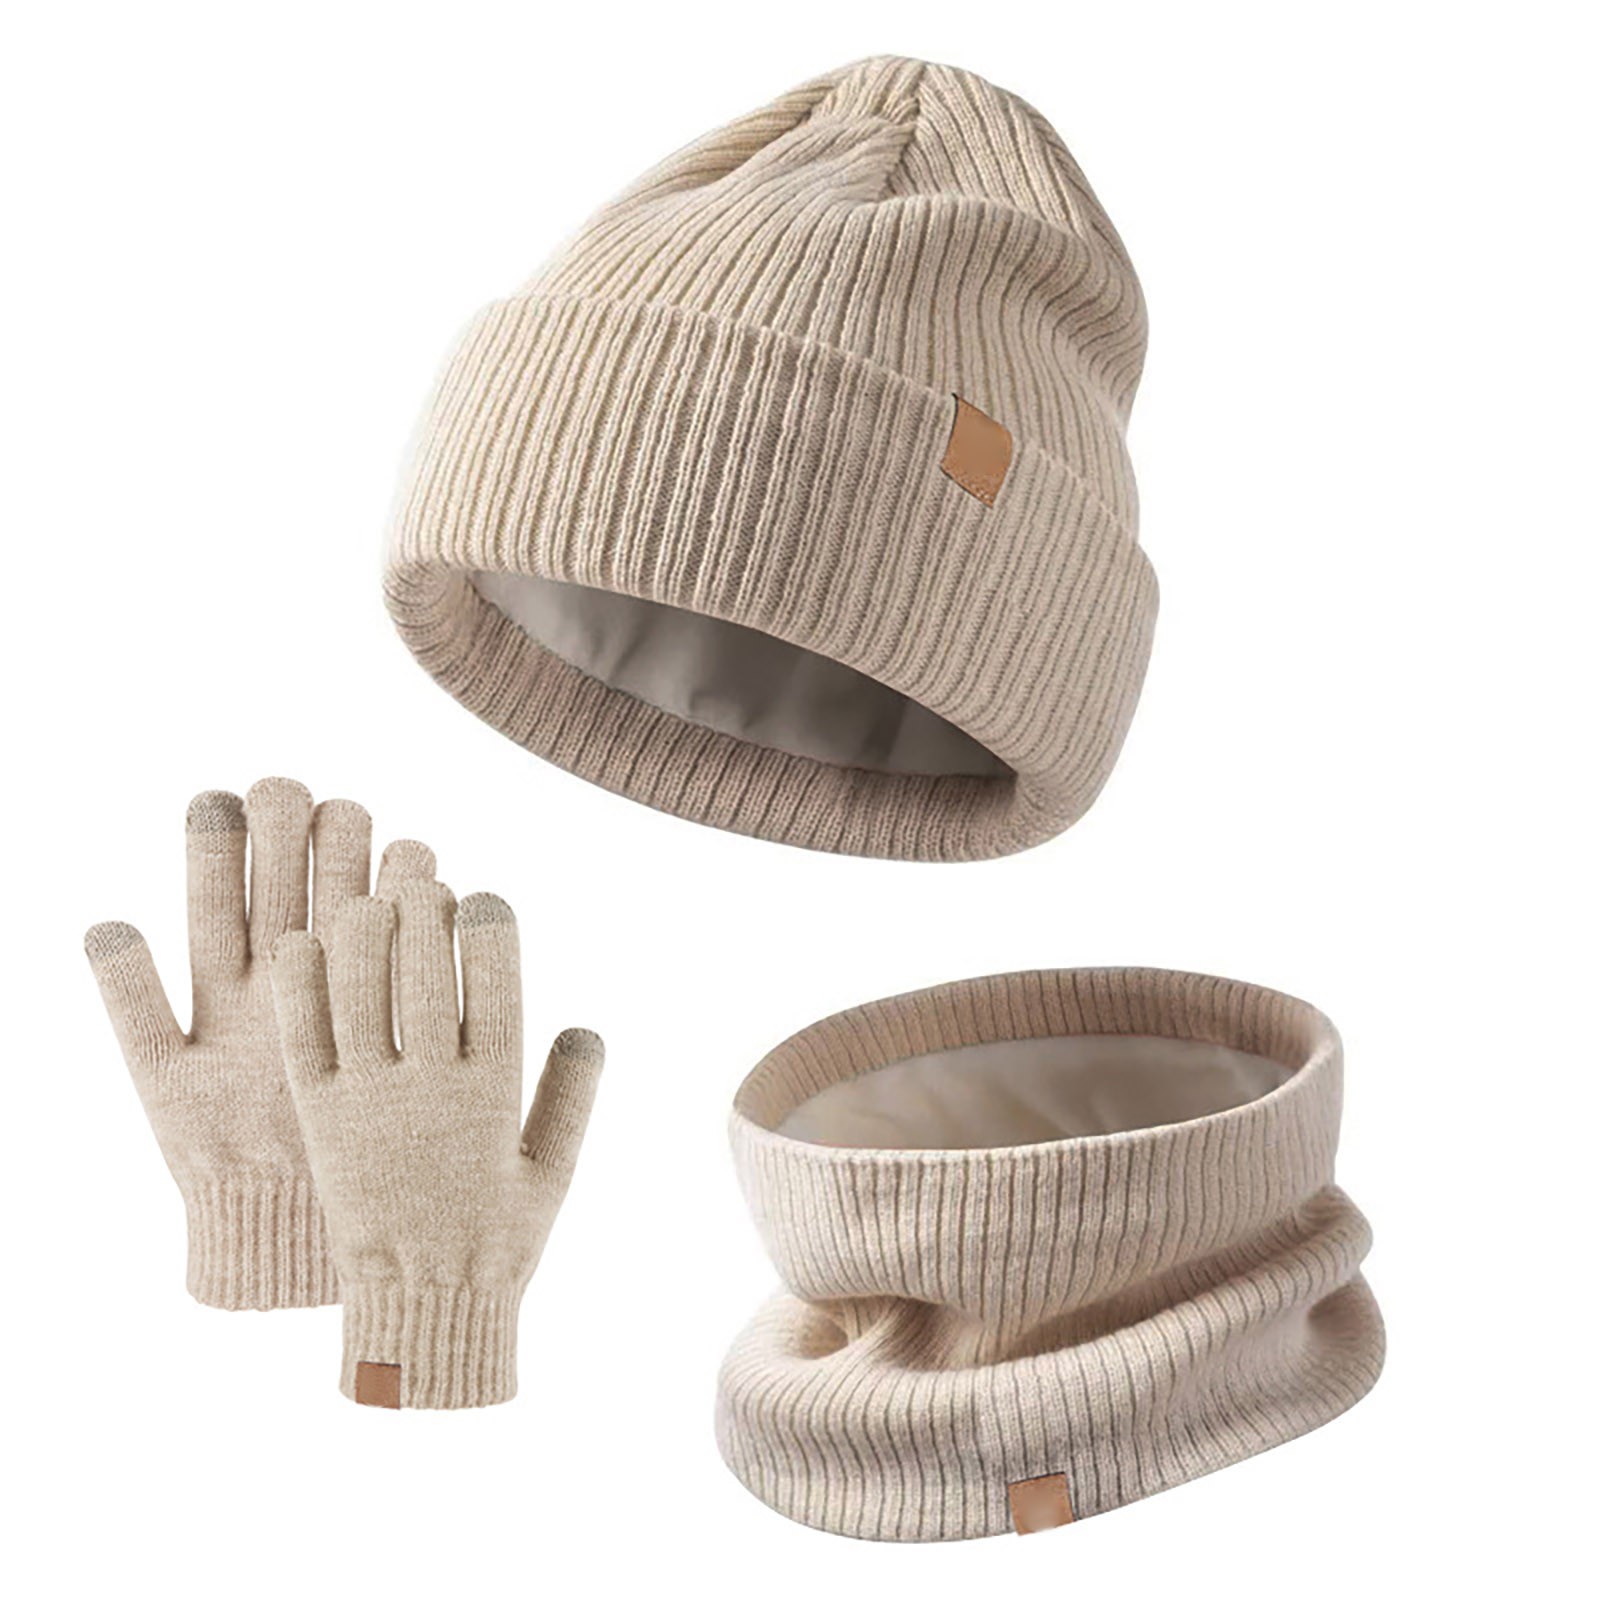 3 Pieces Kids Winter Hat Glove Scarf Sets Knitted Toddler Cap ...